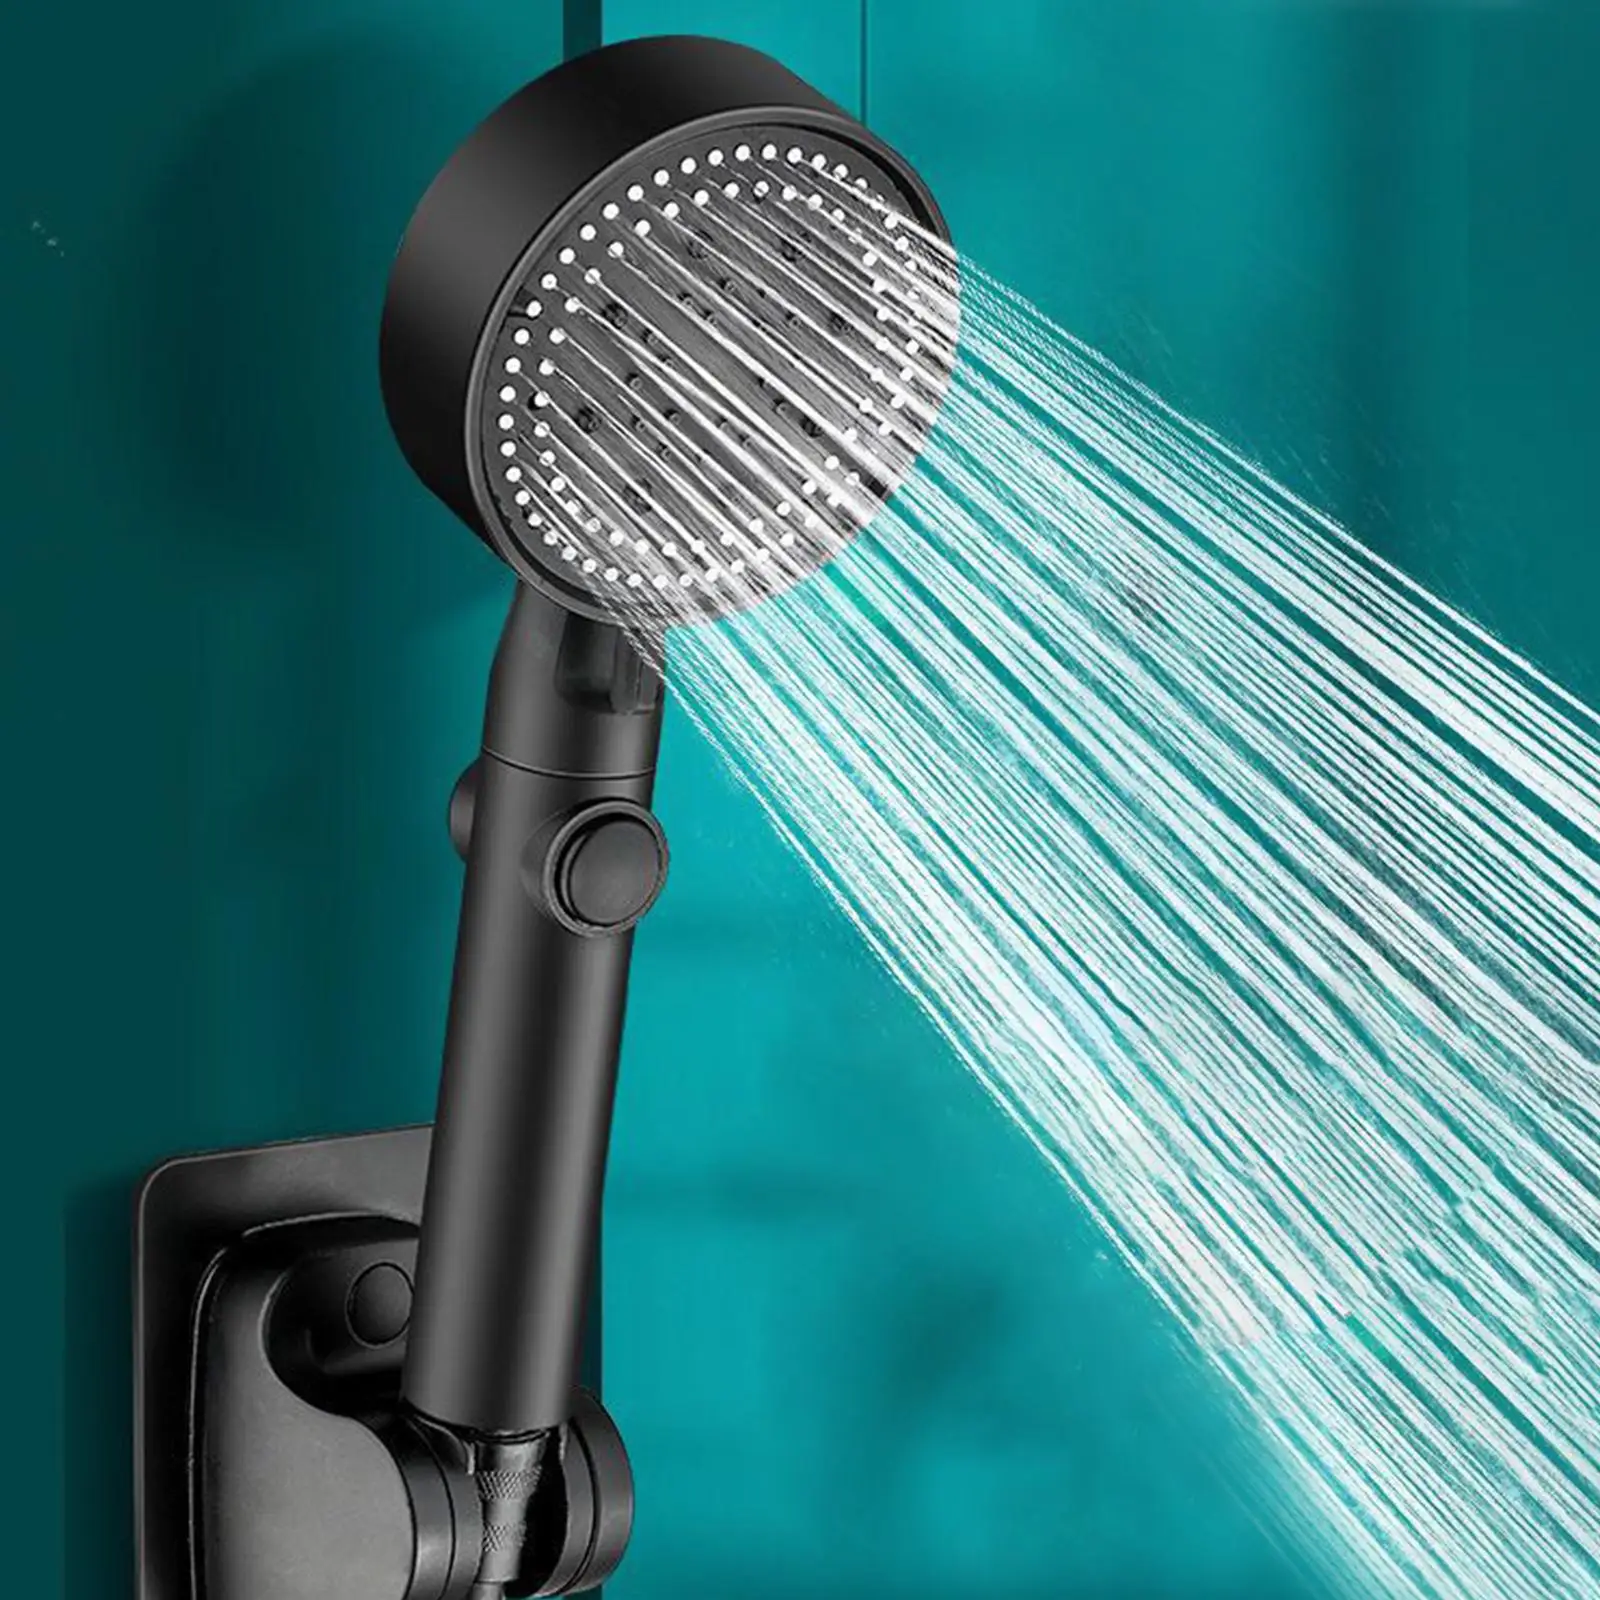 Shower Head 5 Mode Multifunctional Accessories Showerhead for Shower Home